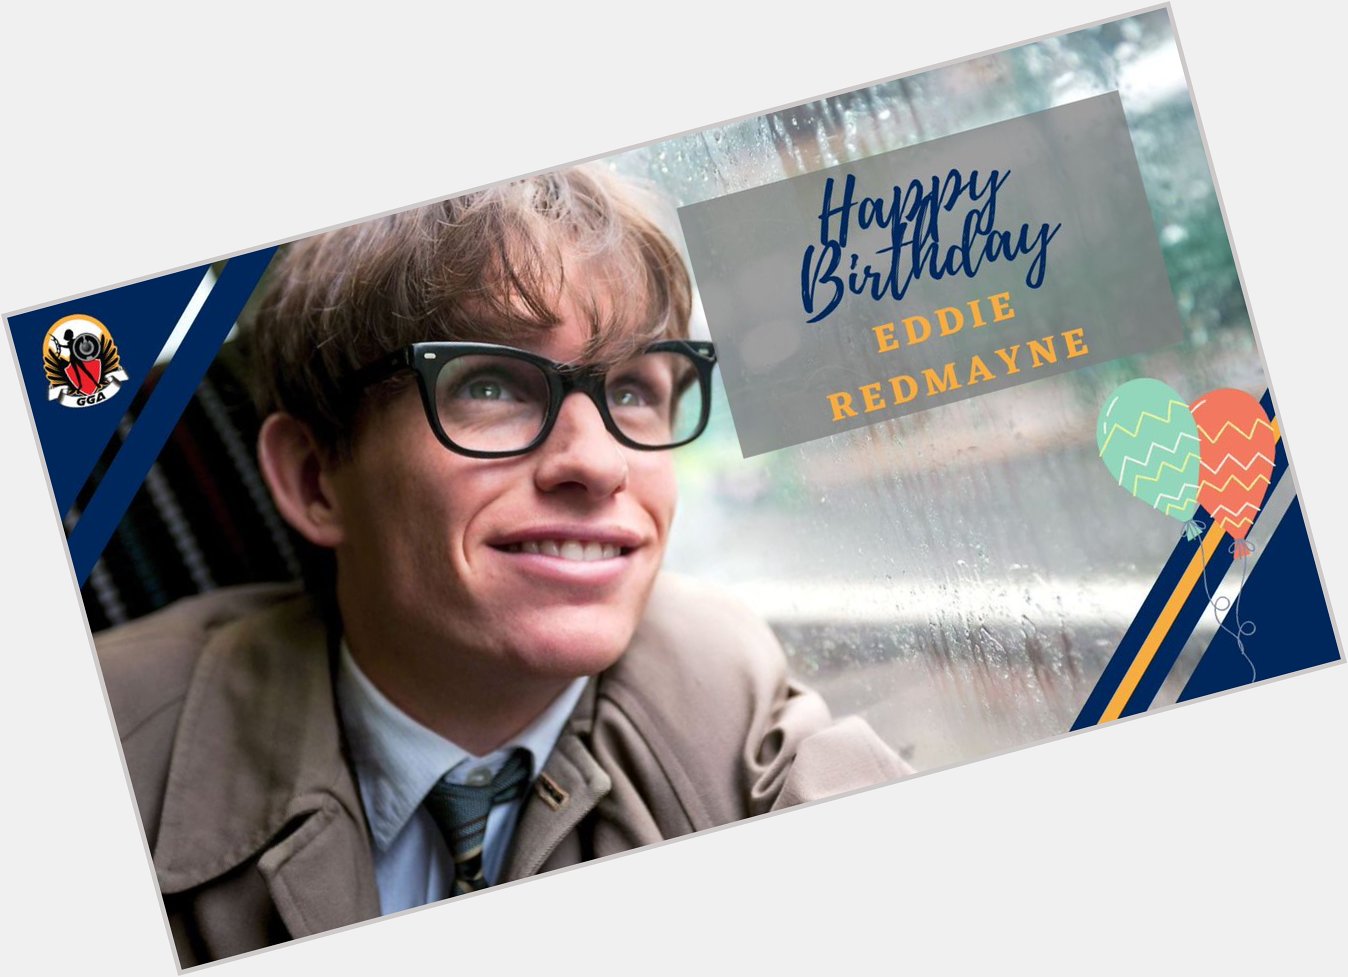 Happy Birthday, Eddie Redmayne!  Which of his roles is your favorite?  